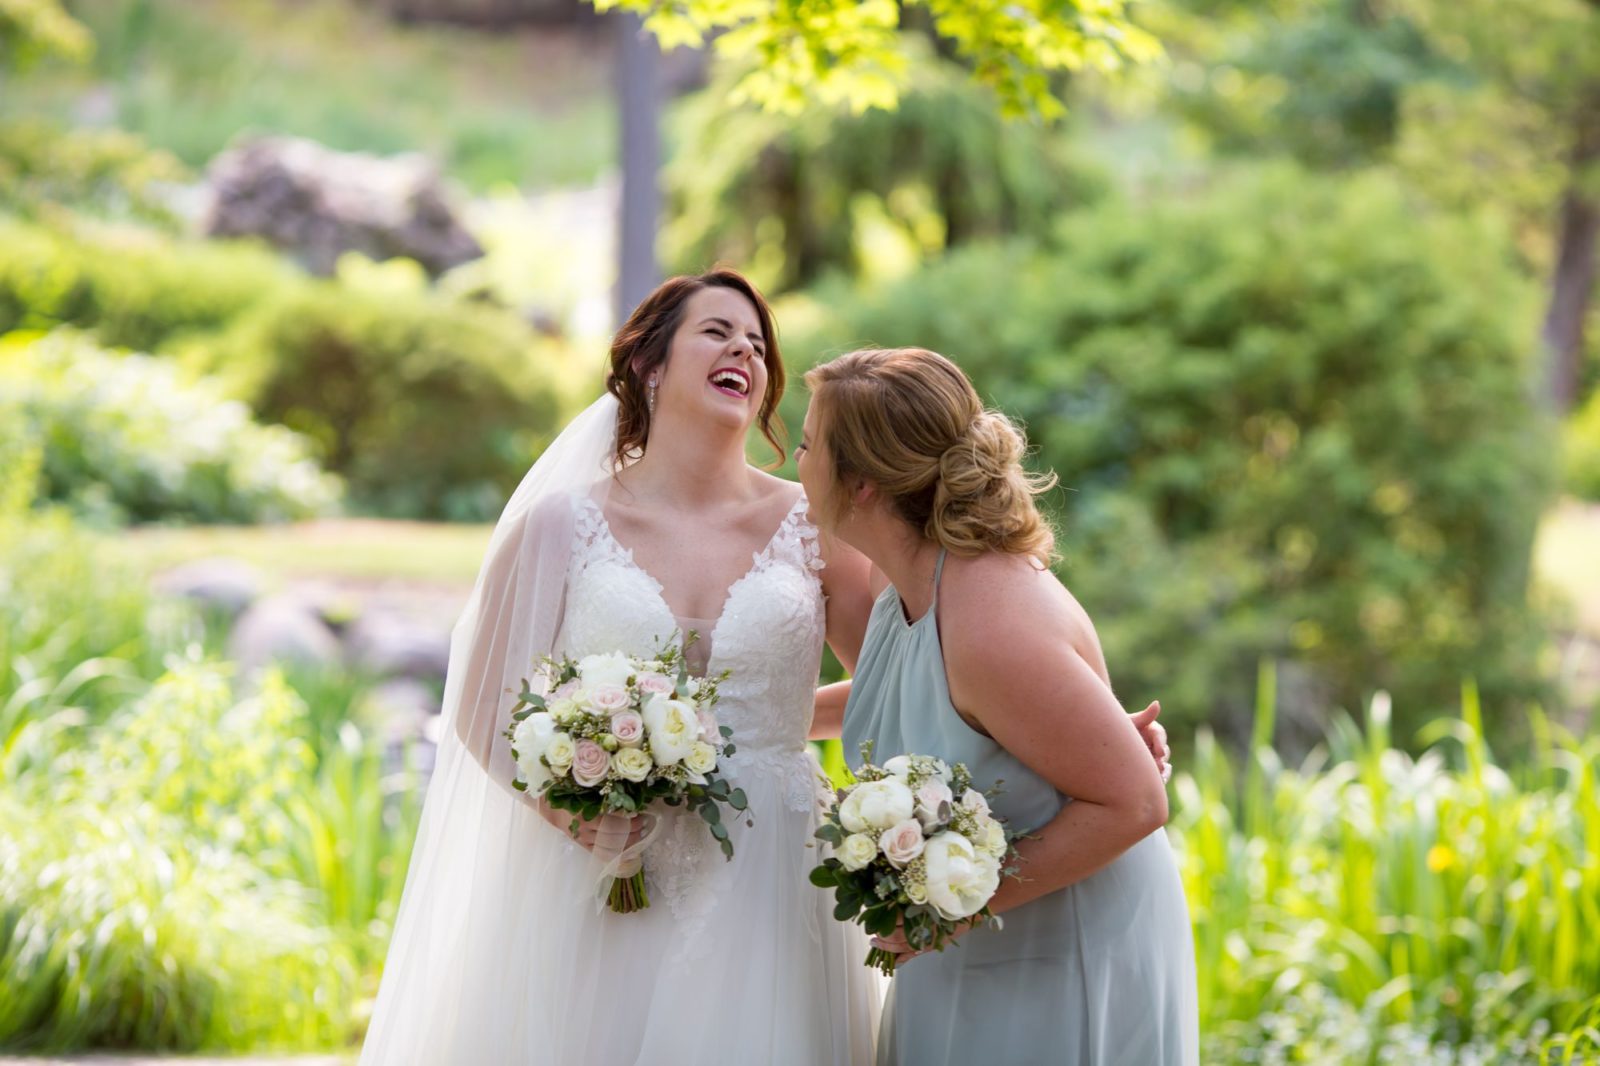 A candid photo of Jenny with her bridesmaid at Fabyan Japanese Garden